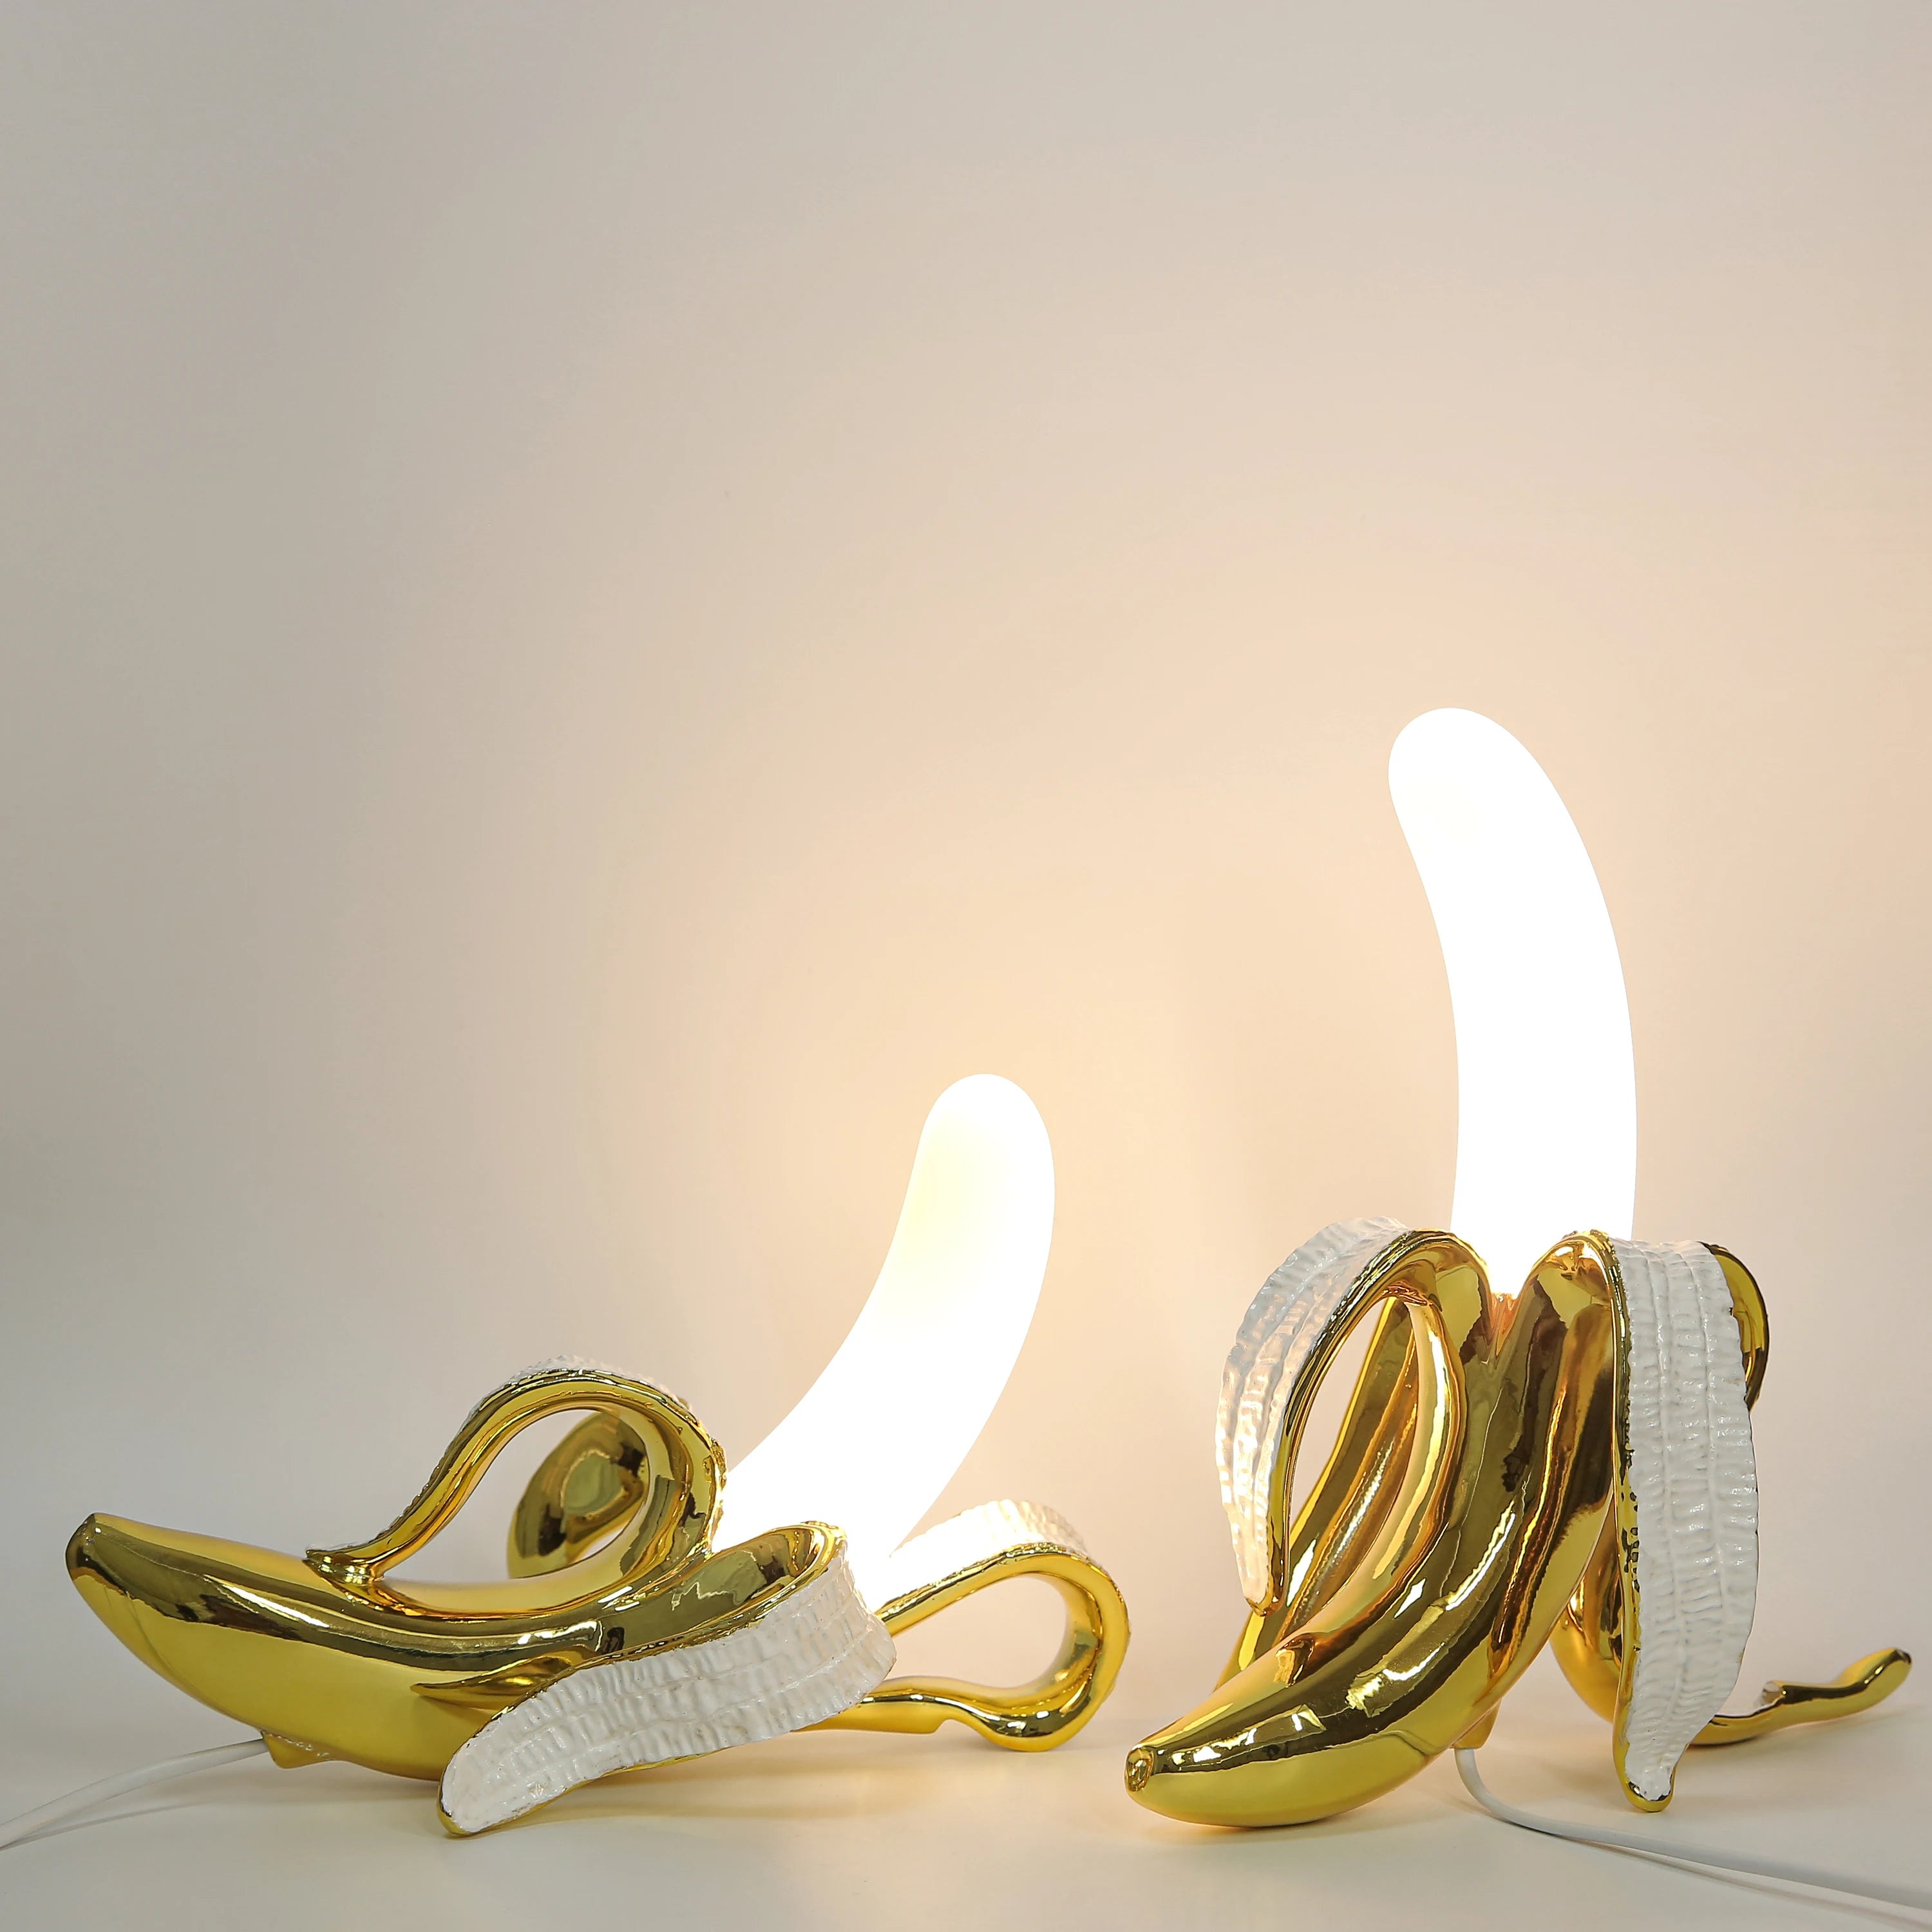 Two golden Banana Table Lamps with illuminated white bulbs, set against a plain light background.